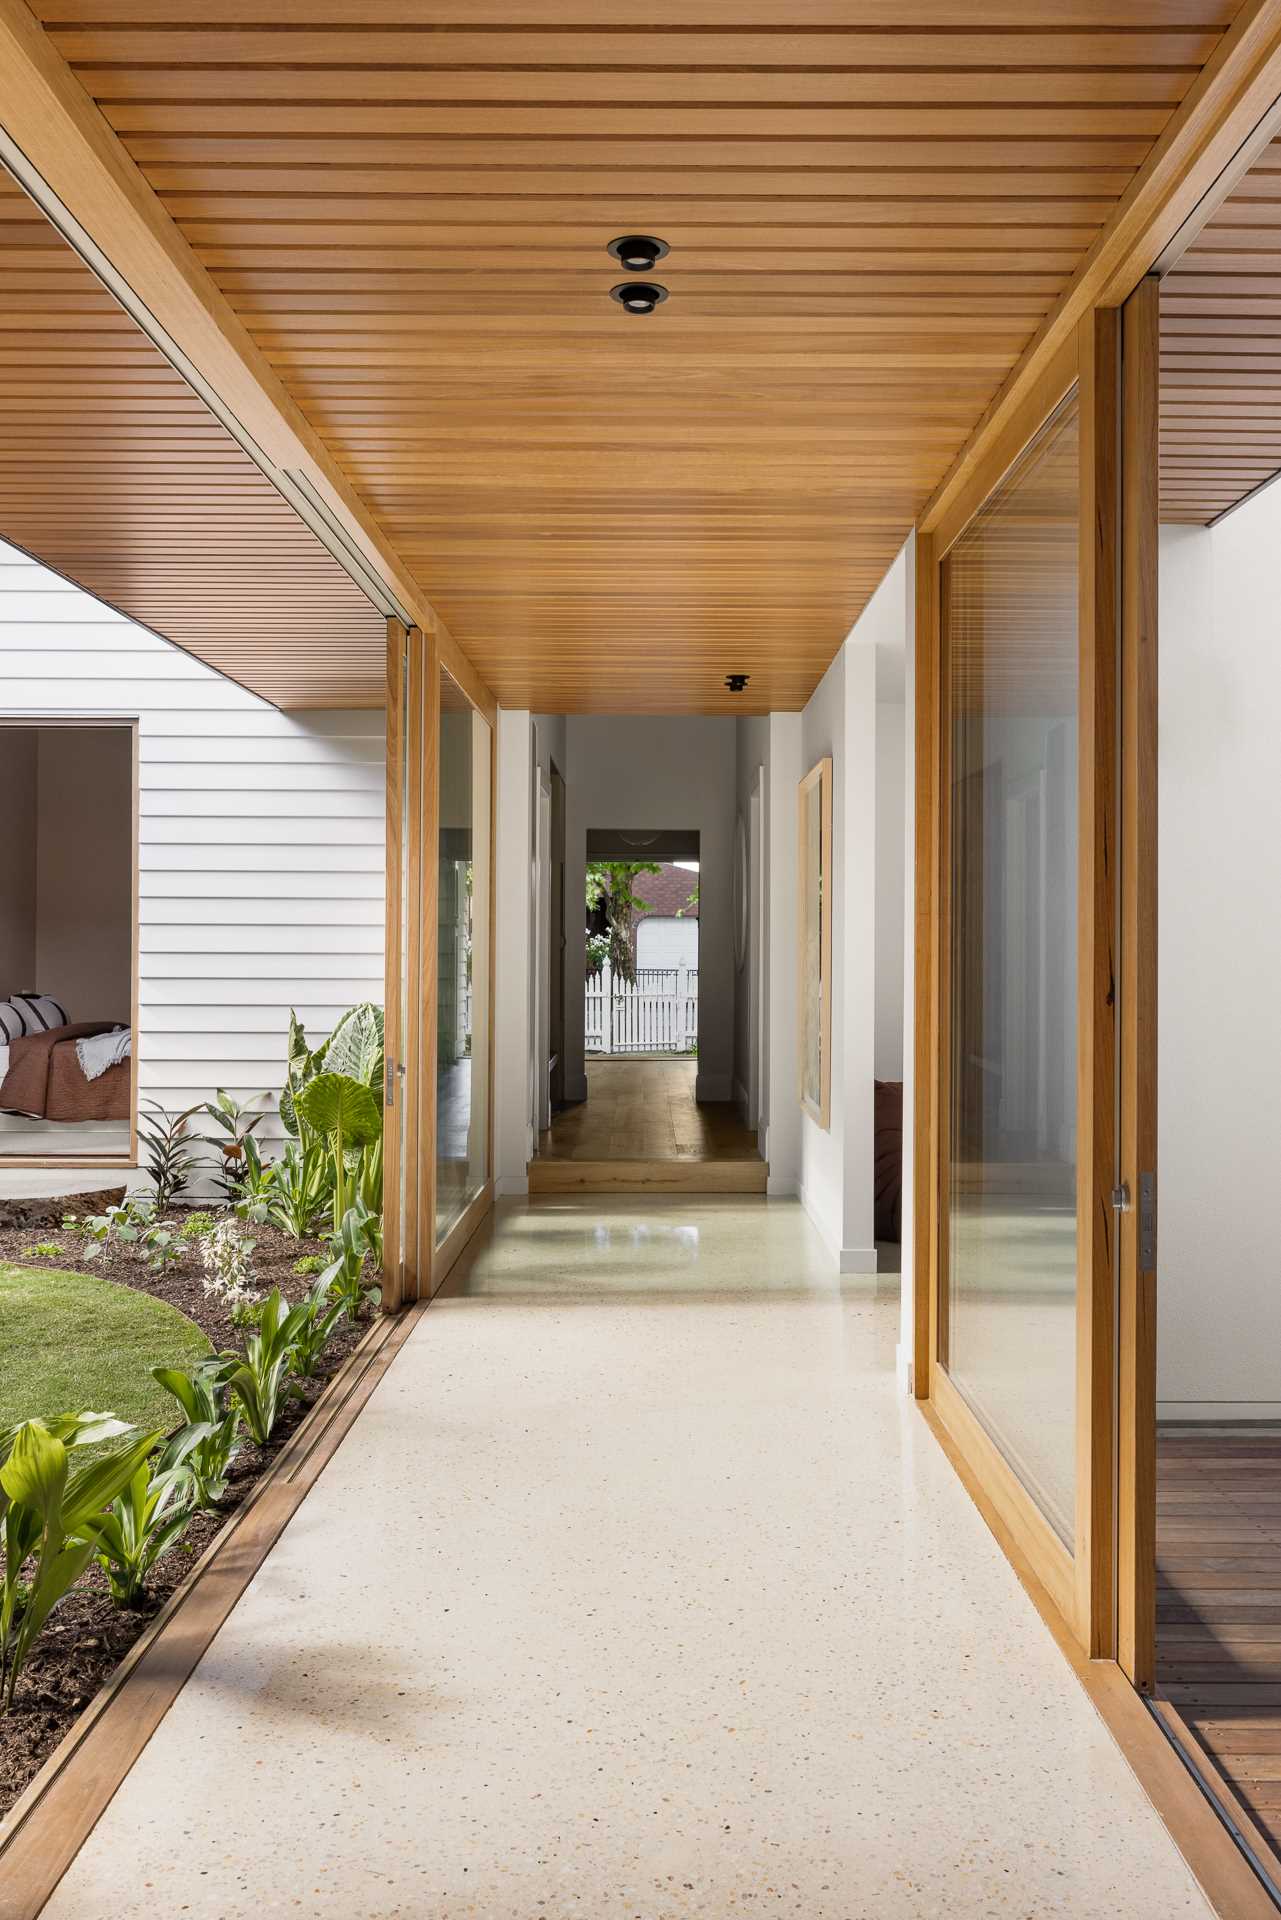 The hallway transitions into a walkway with sliding glass doors that connect to the outdoor spaces on each site.